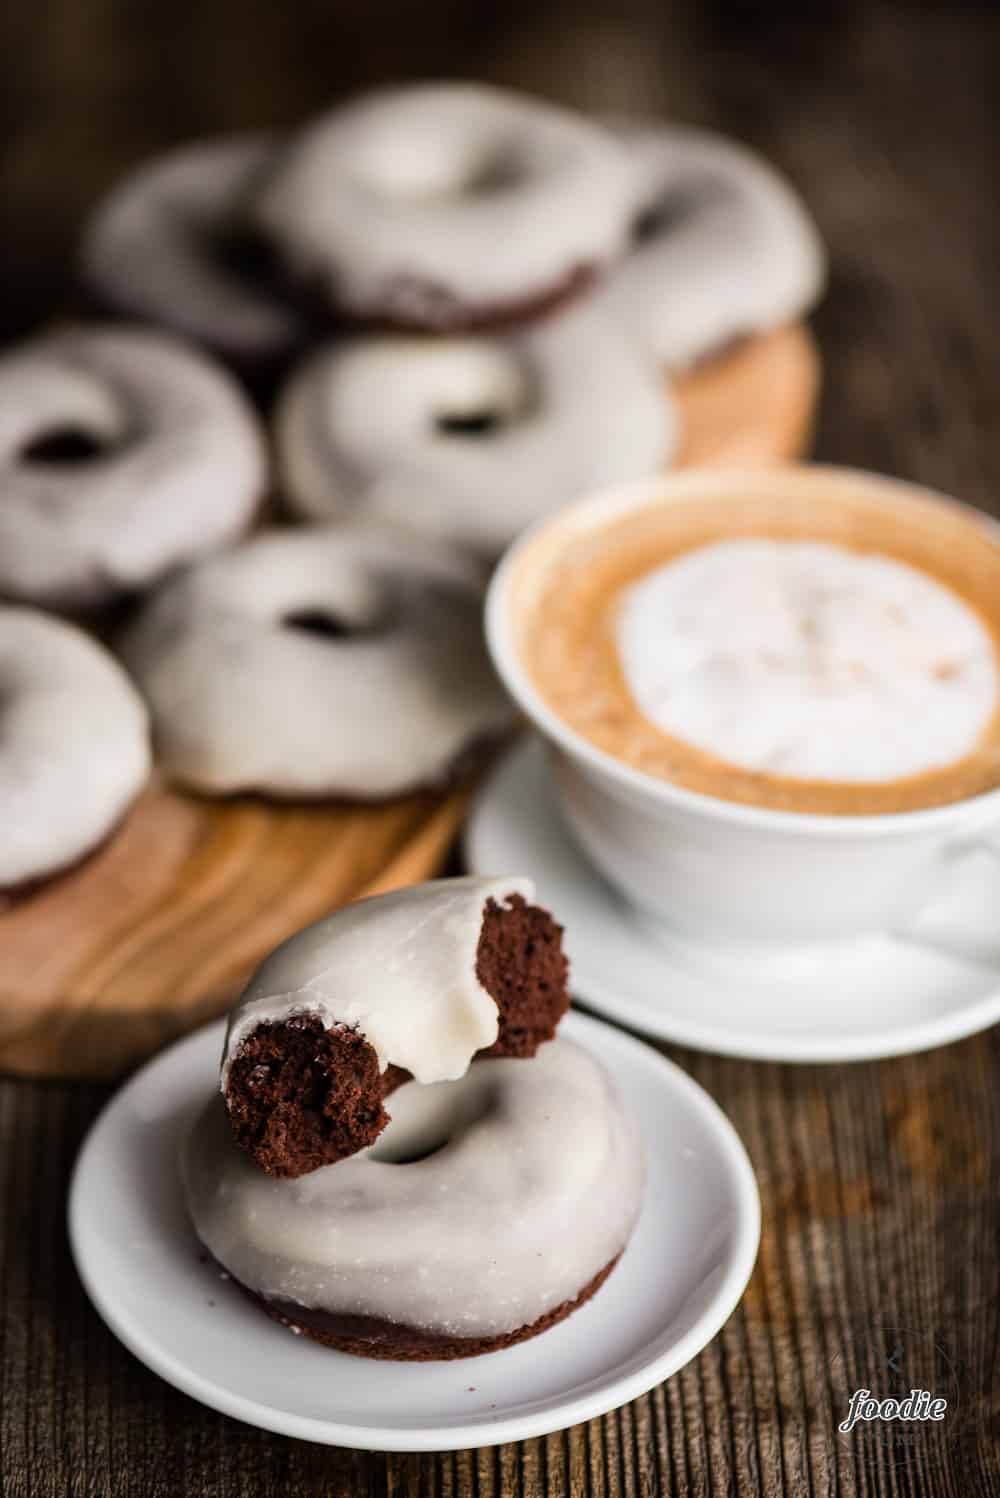 baked chocolate glazed donuts with coffee in the background